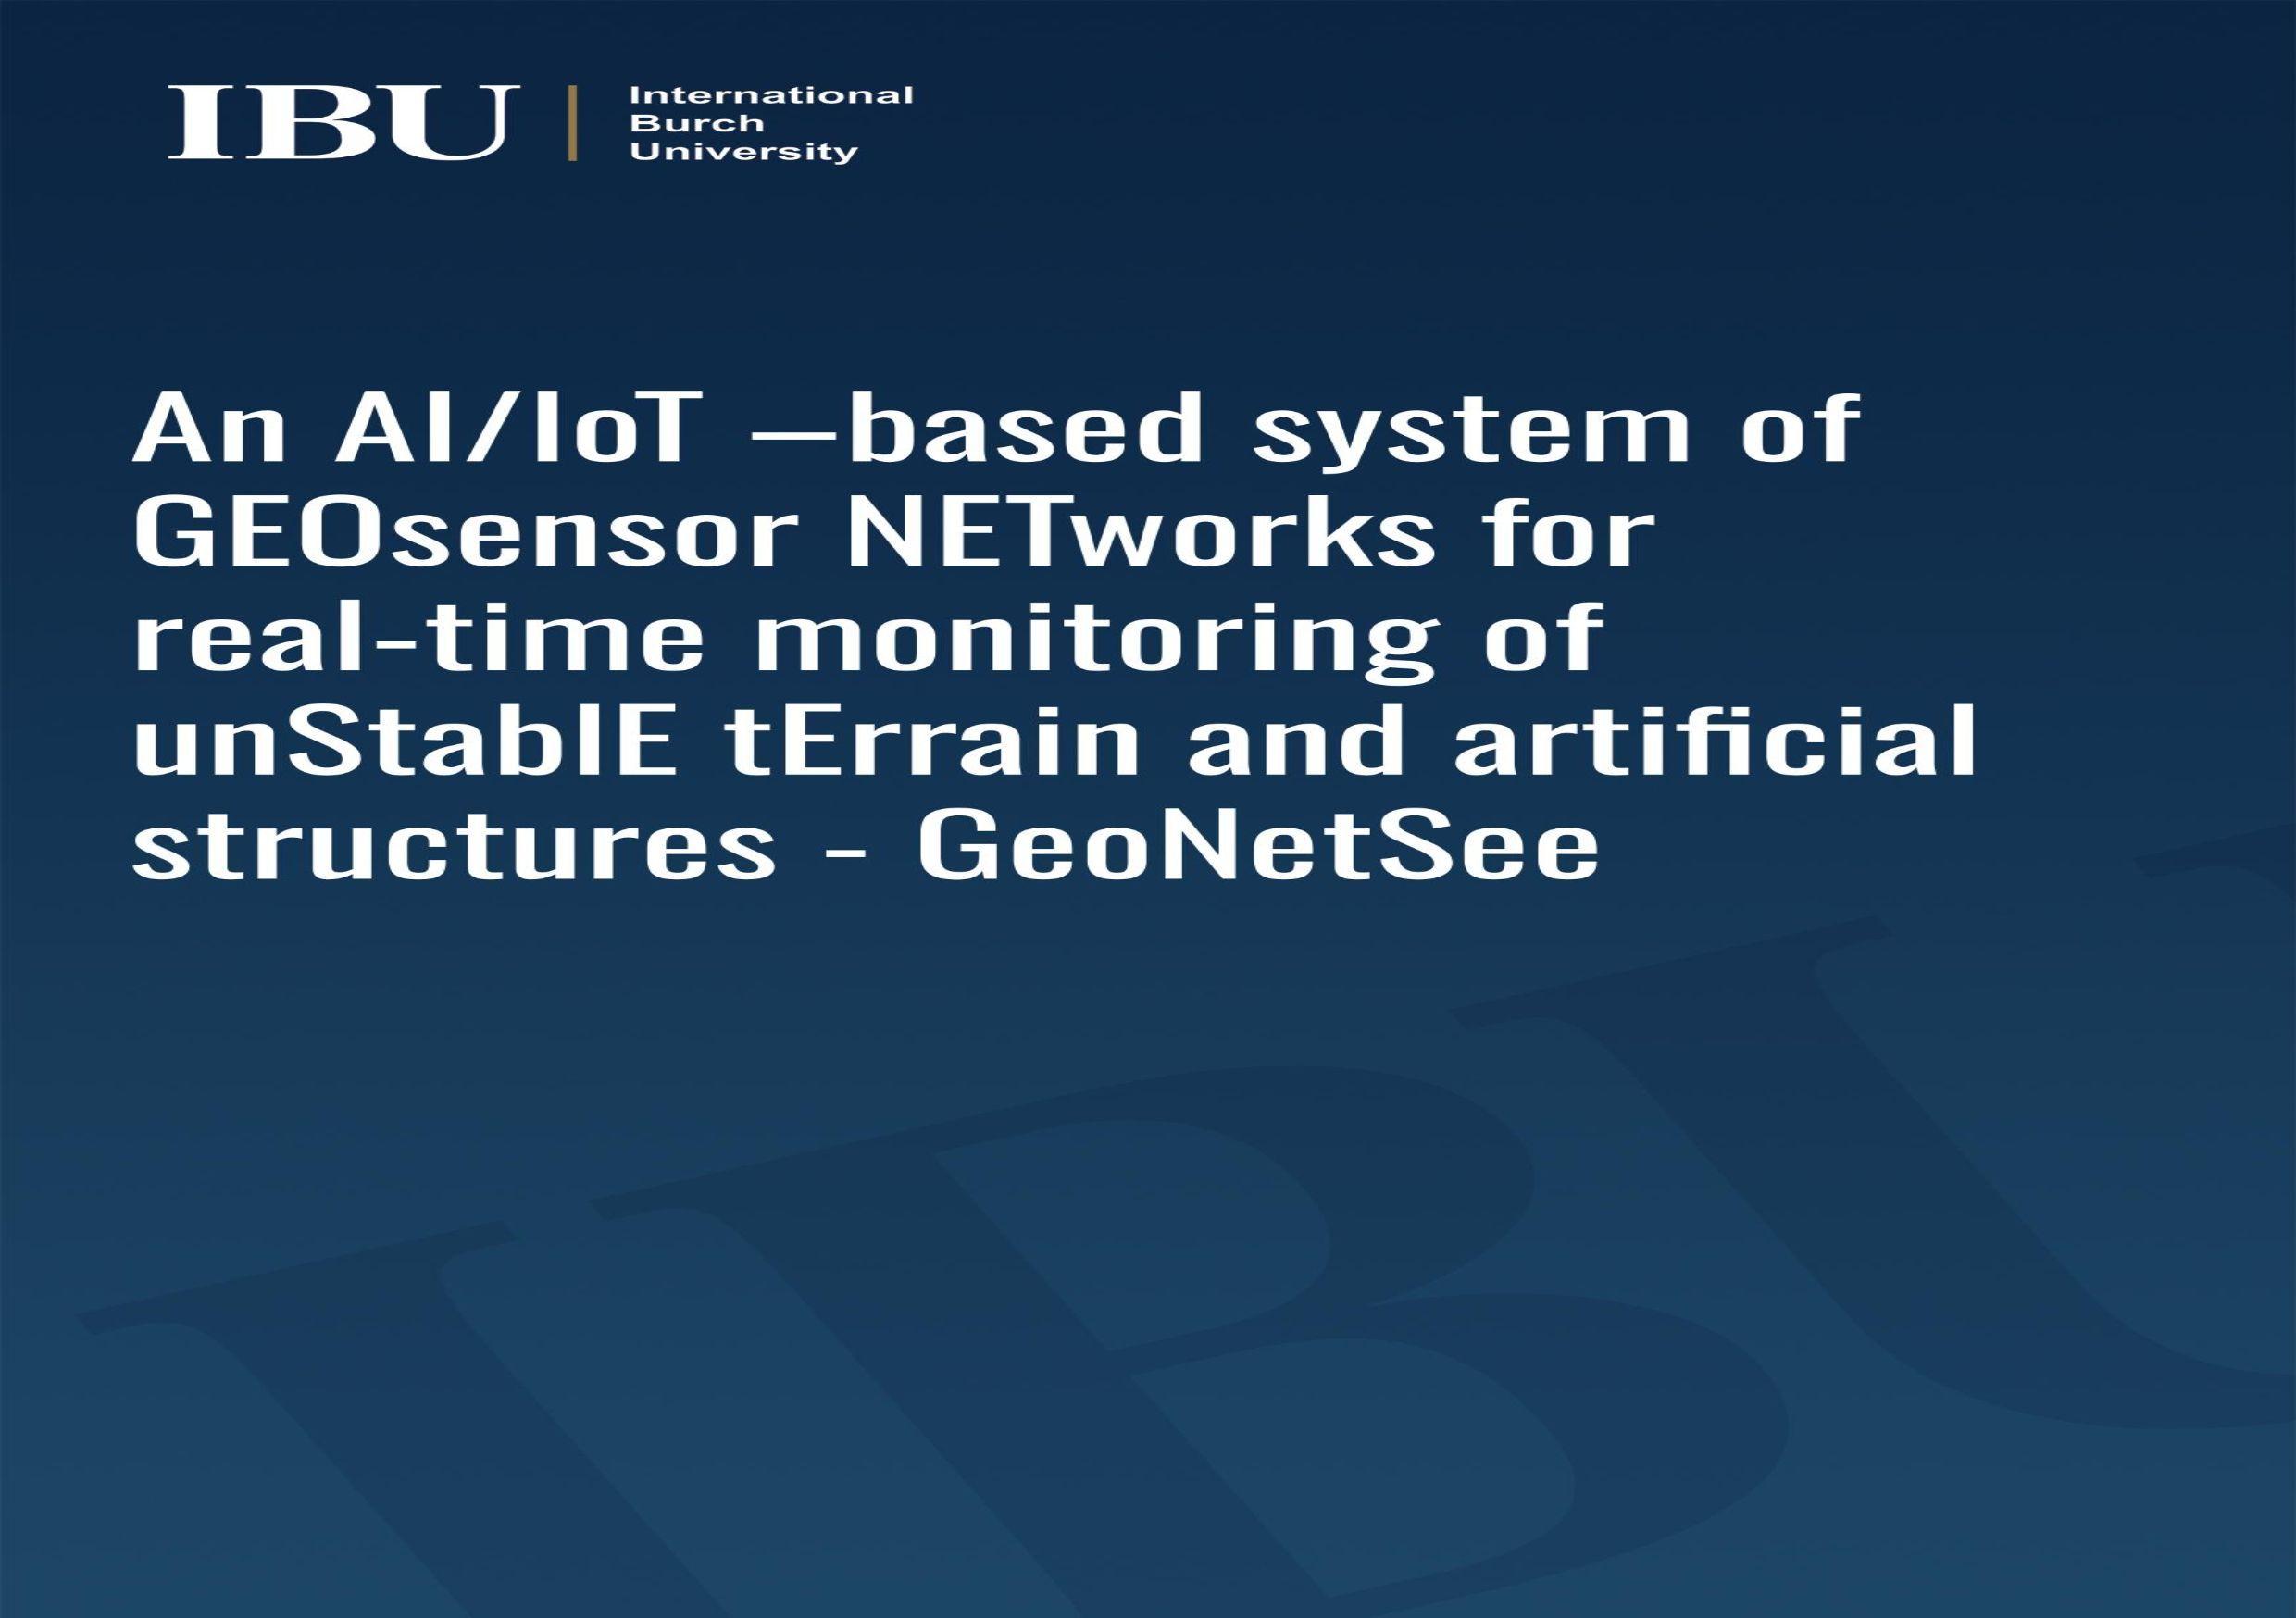 An AI/IoT –based system of GEOsensor NETworks for real-time monitoring of unStablE tErrain and artificial structures - GeoNetSee